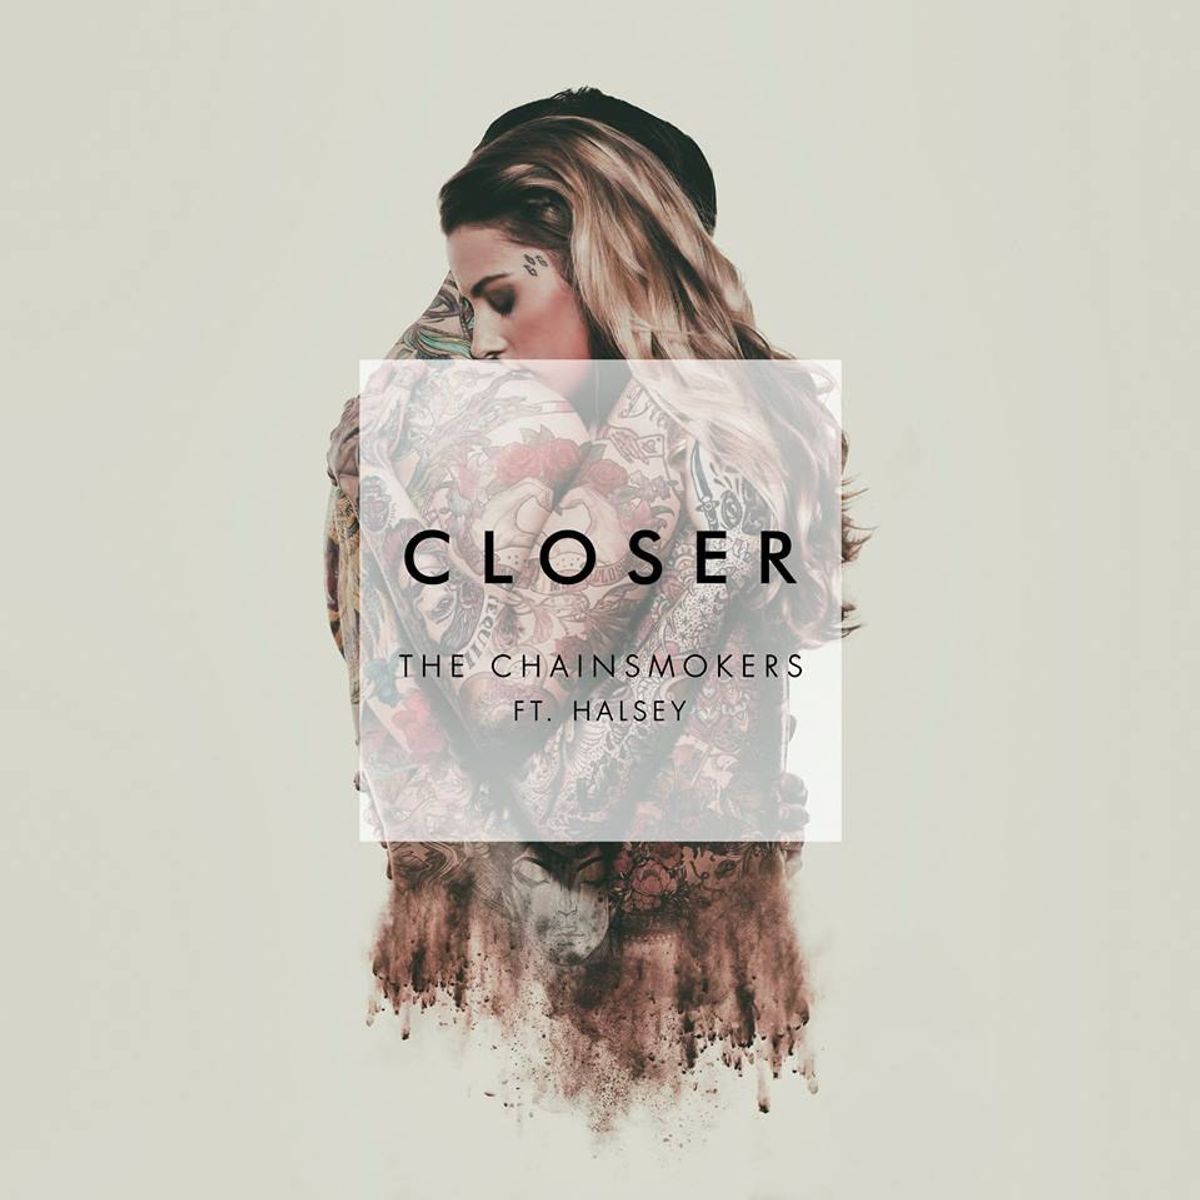 Why Everyone Should Listen To "Closer" Ft Halsey By The Chainsmokers